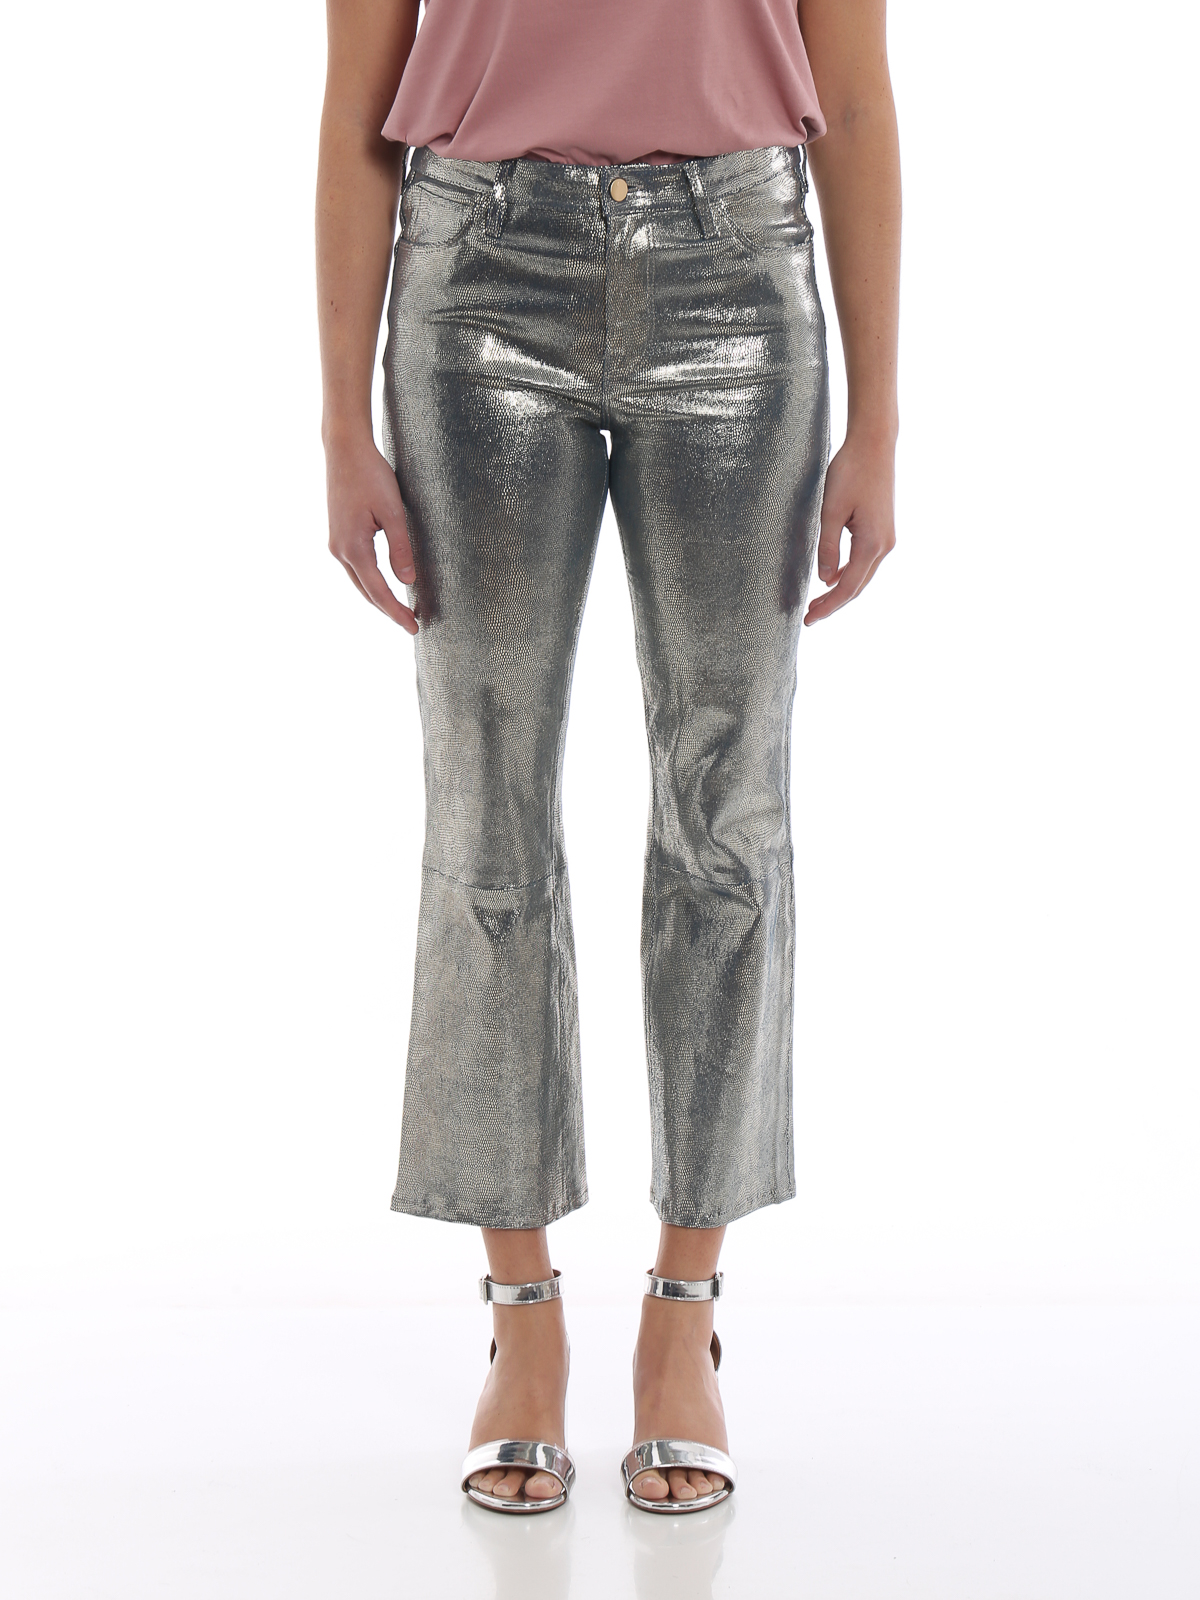 J Brand - Selena gold snake crop boot trousers - leather trousers ...